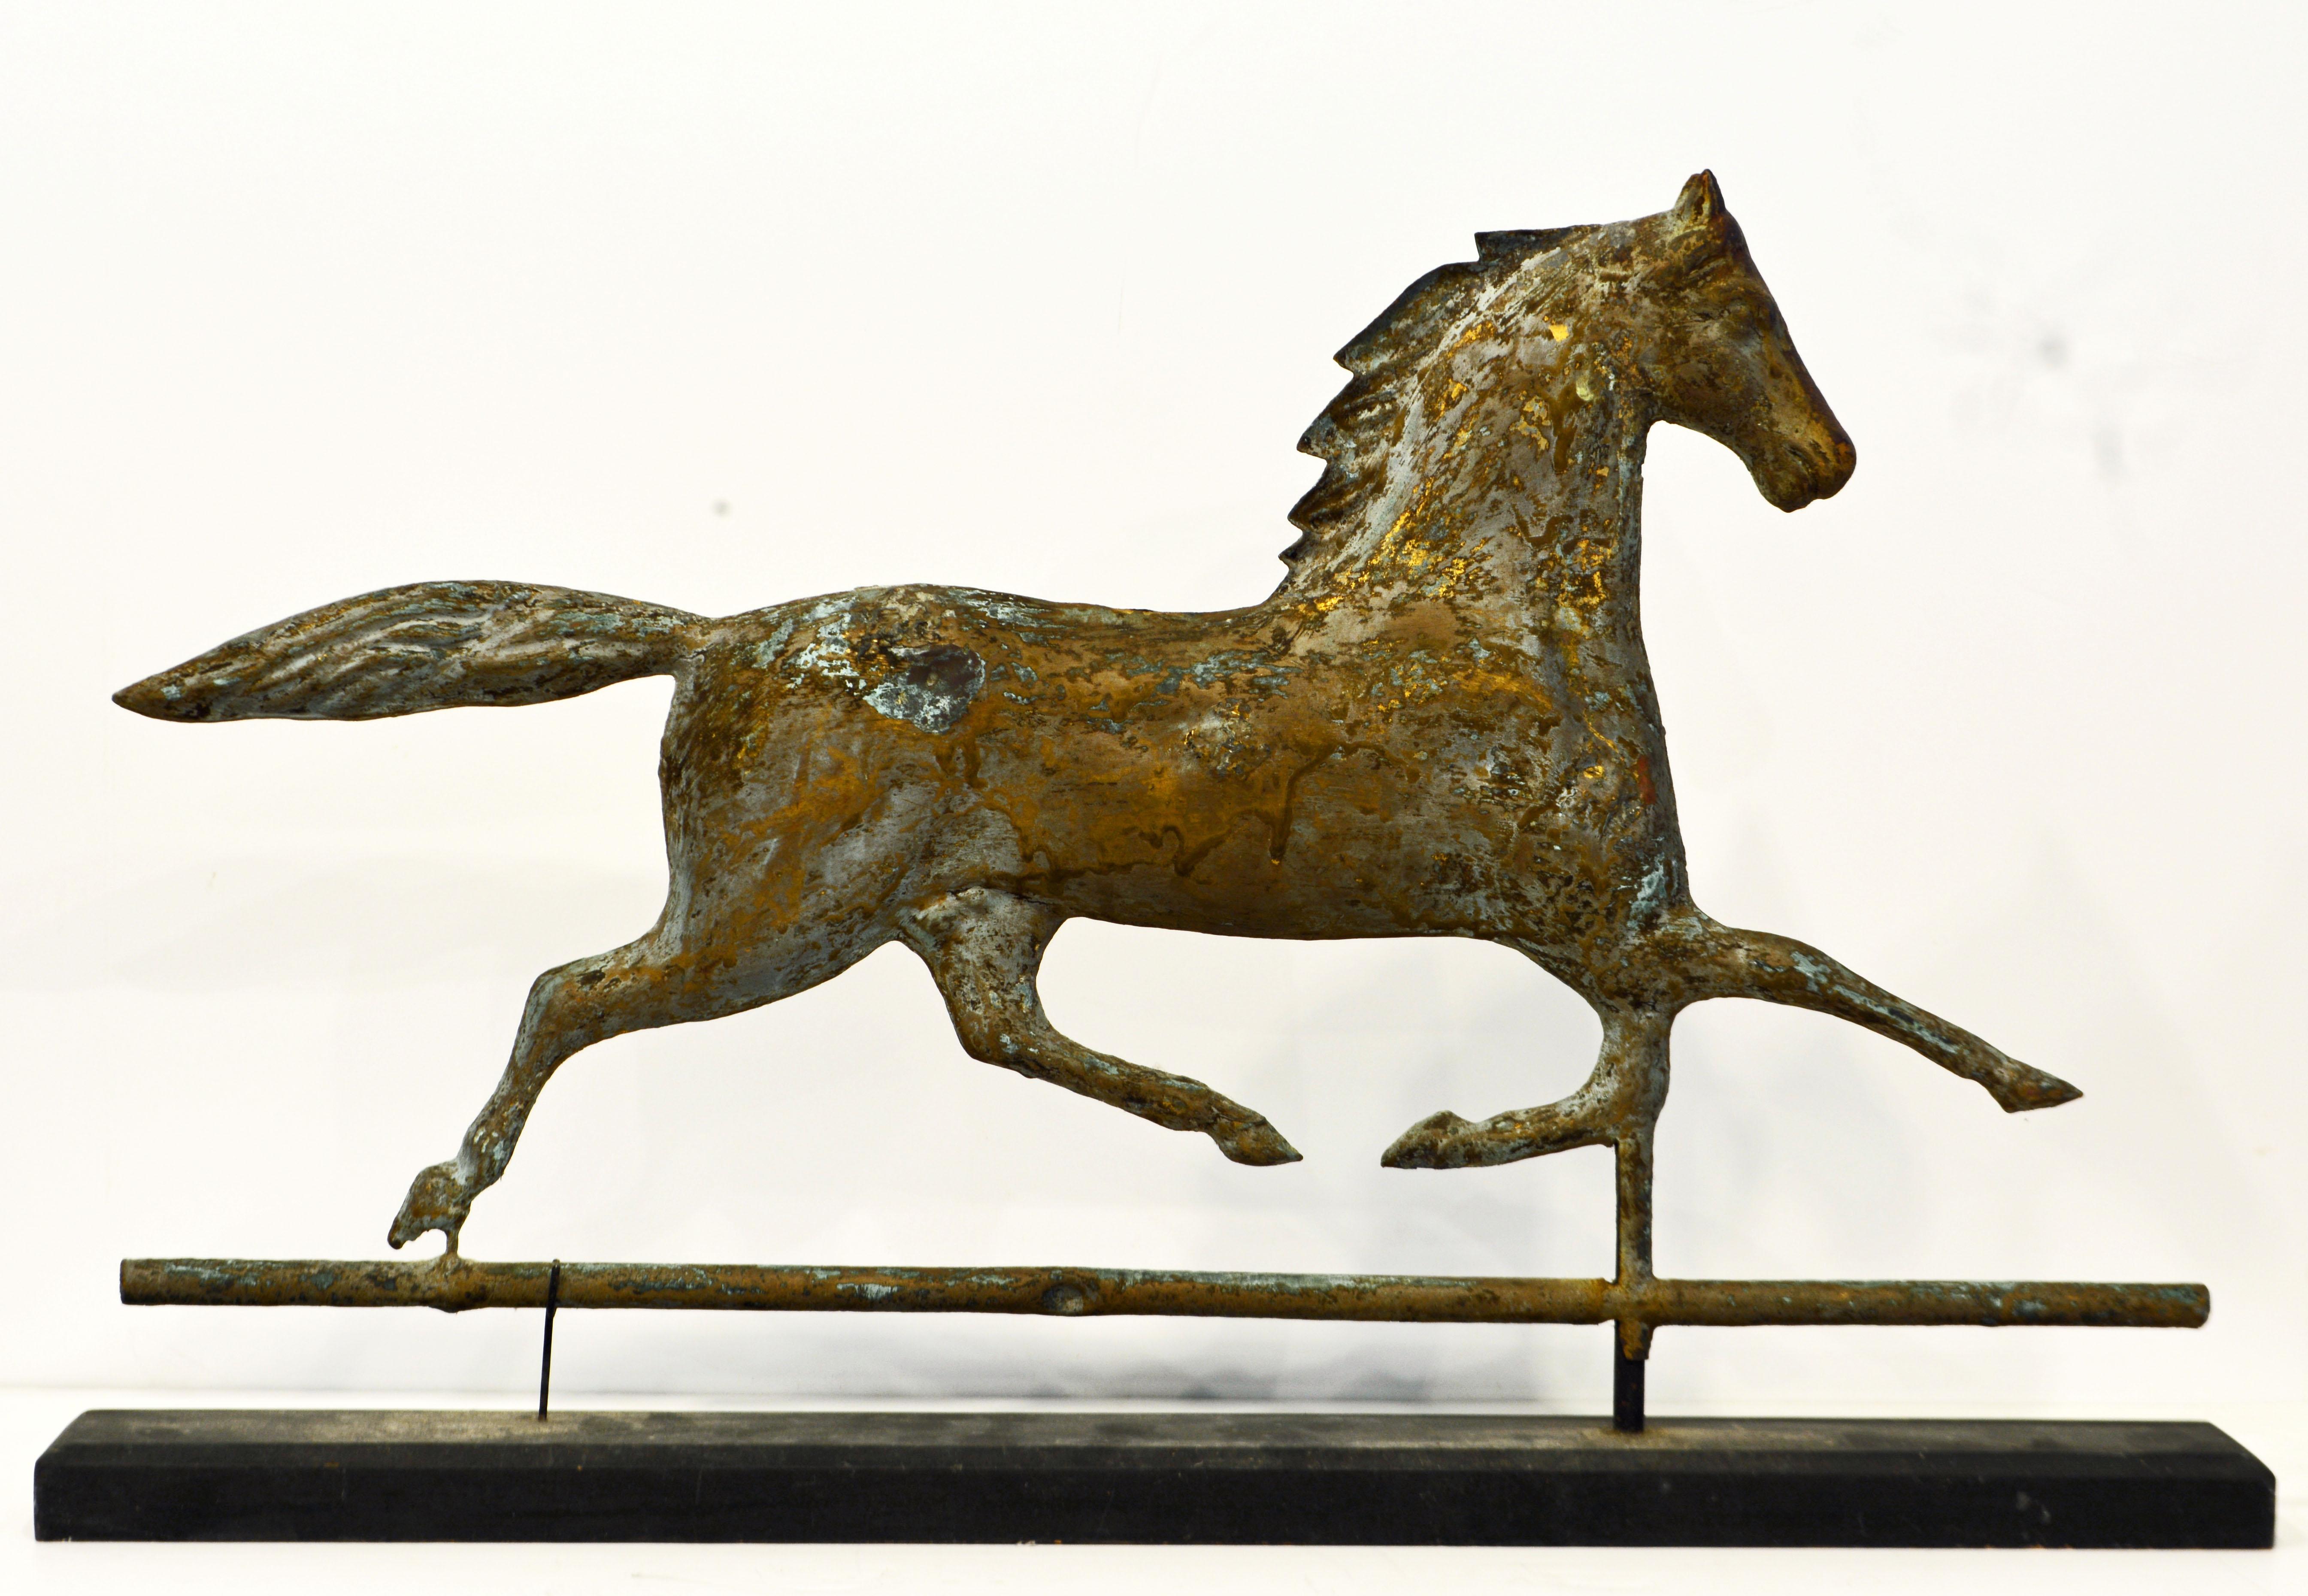 Being 26 in. long this copper weather vane which is attributed to J. W. Fiske & Company features a full bodied carriage horse with a wonderful patina revealing verdigris, traces of gilt and oxidation. The horse is mounted on a long ebonized wooden